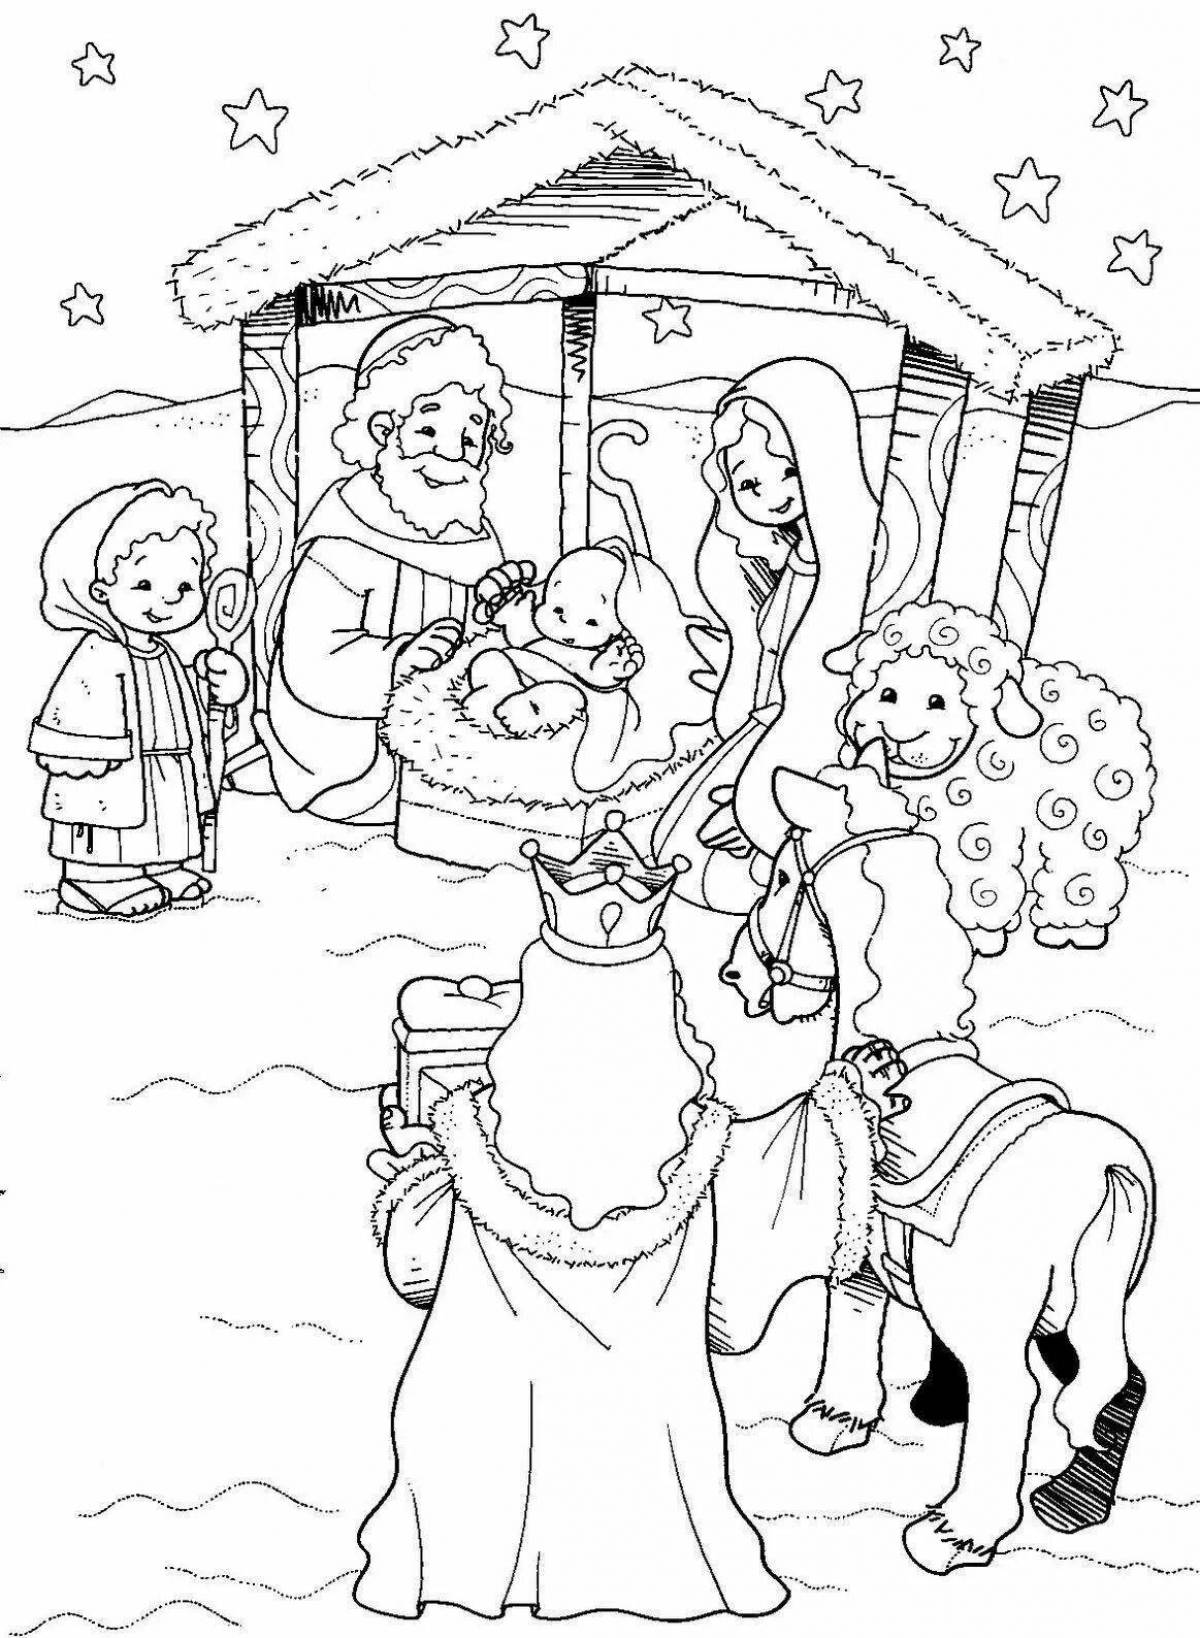 Great Christmas coloring book for 3-4 year olds